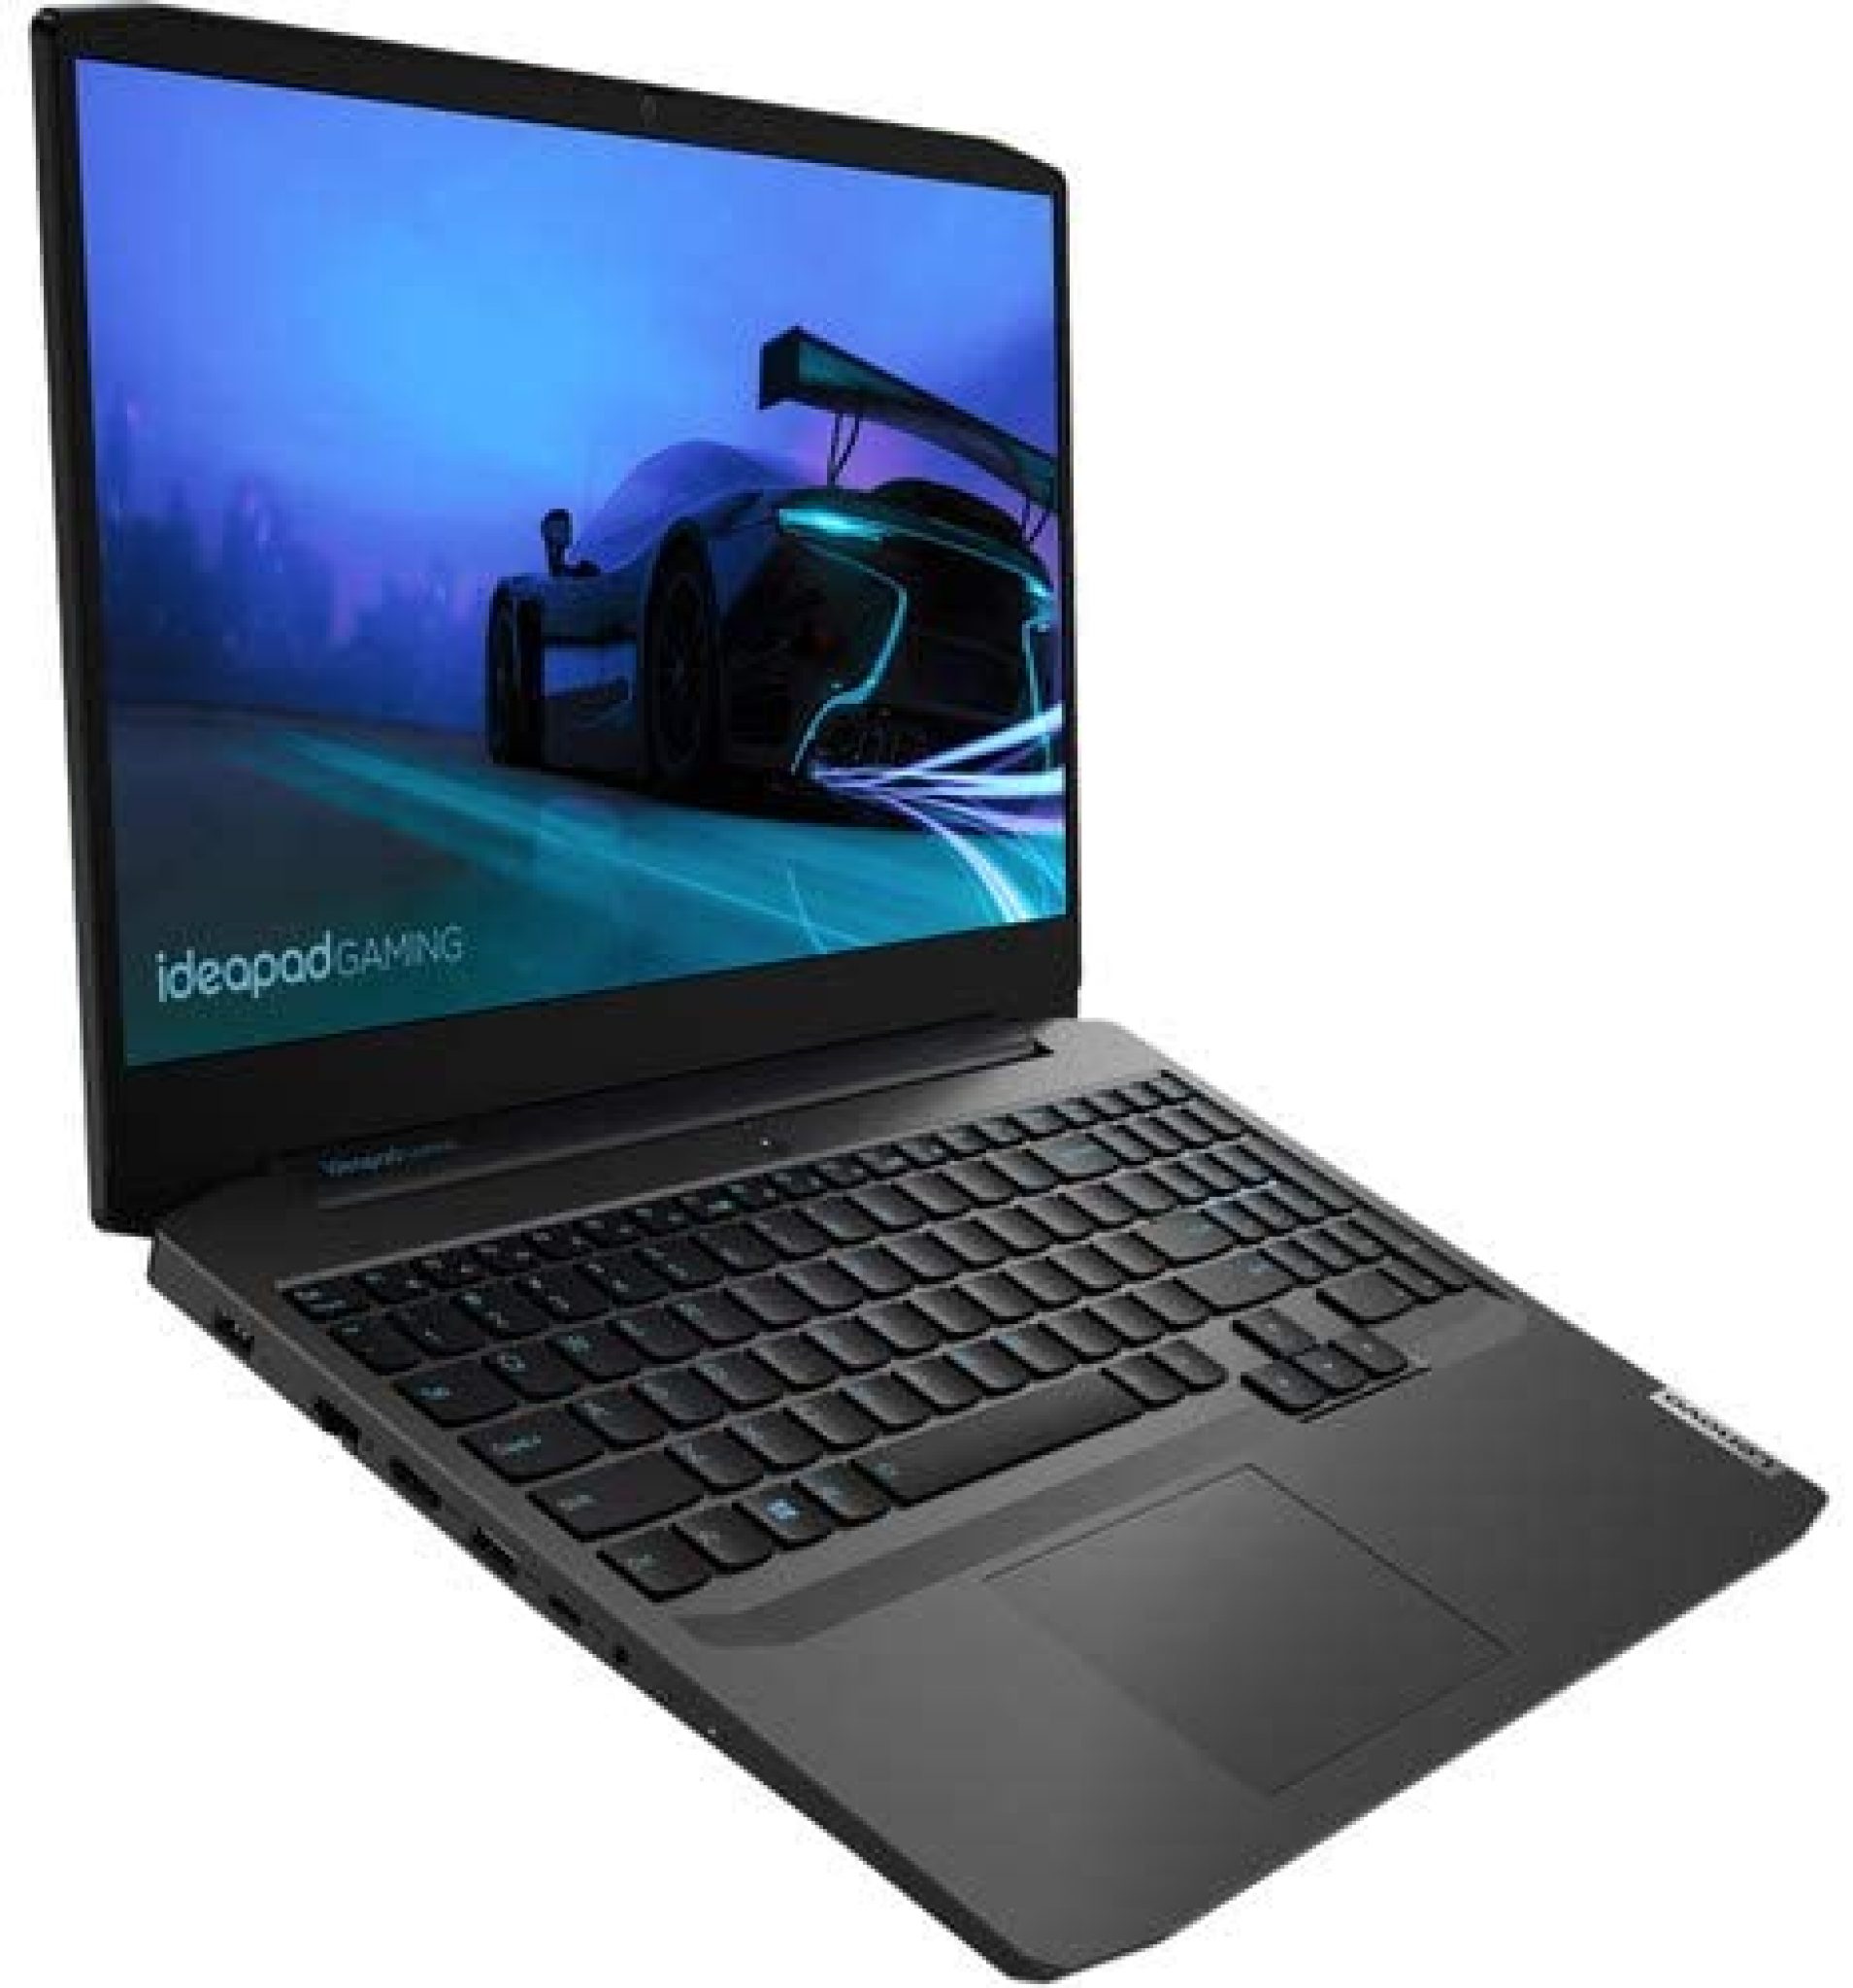 An image of a Lenovo IdeaPad Gaming 3 notebook